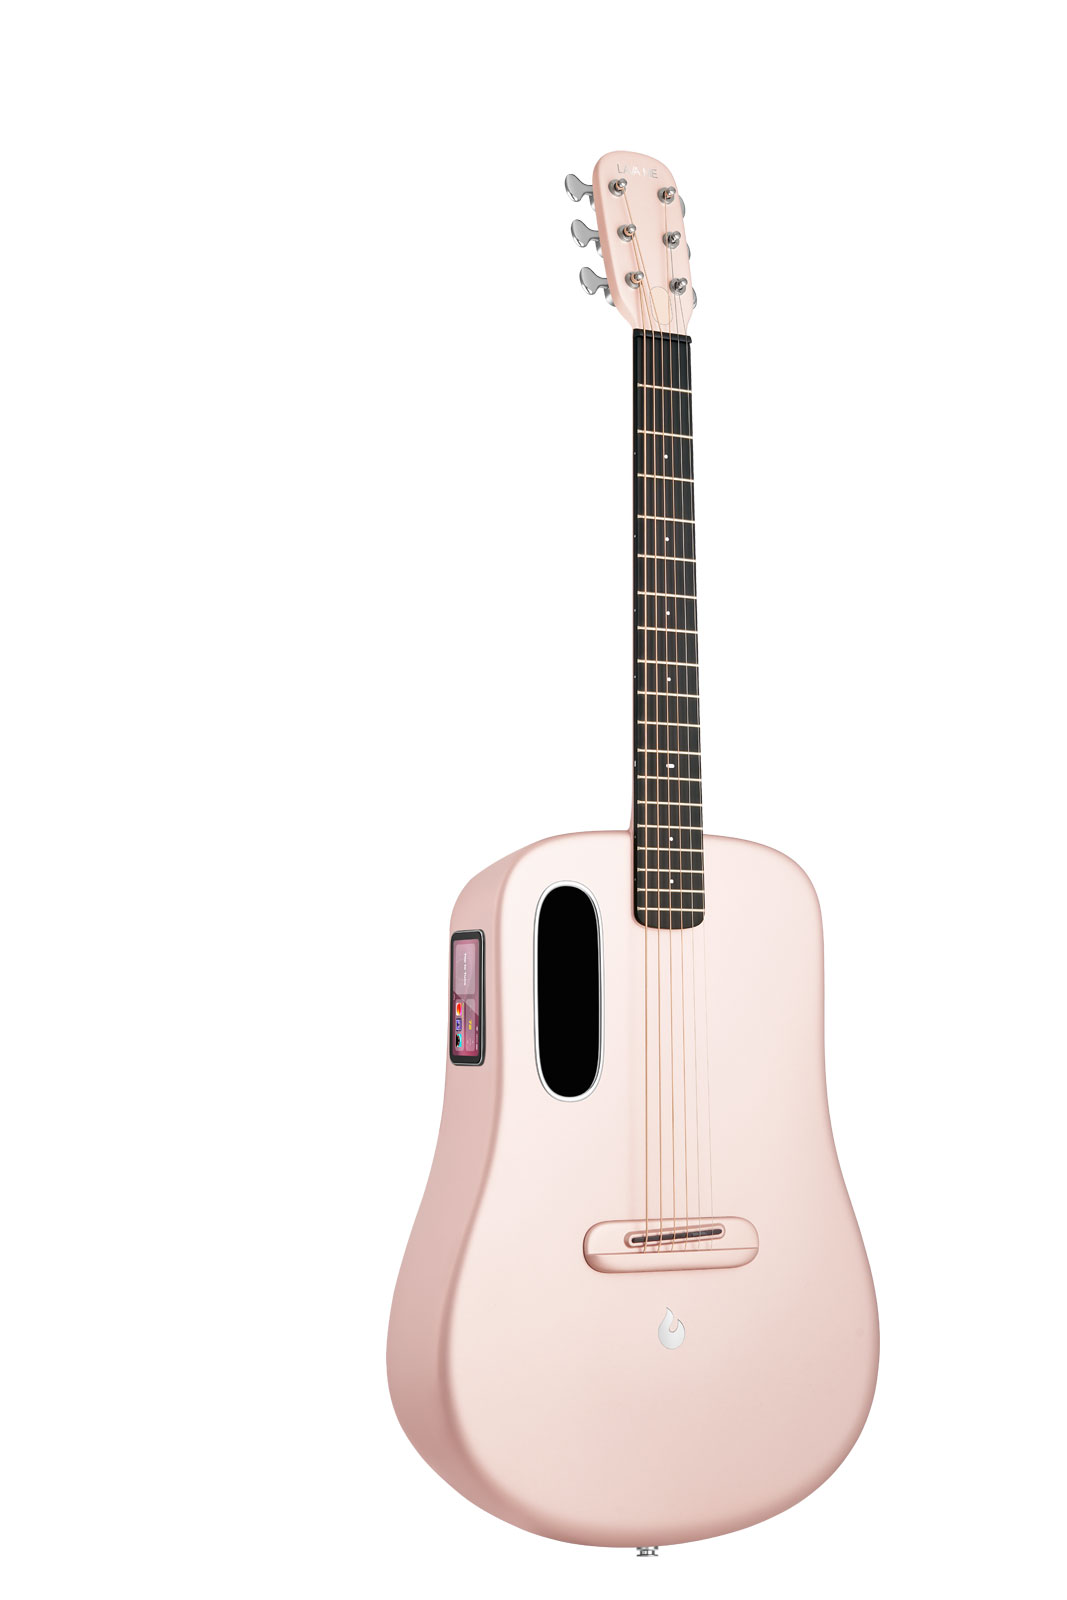 LAVA MUSIC LAVA ME 4 CARBON SERIES 36'' PINK -WITH AIRFLOW BAG